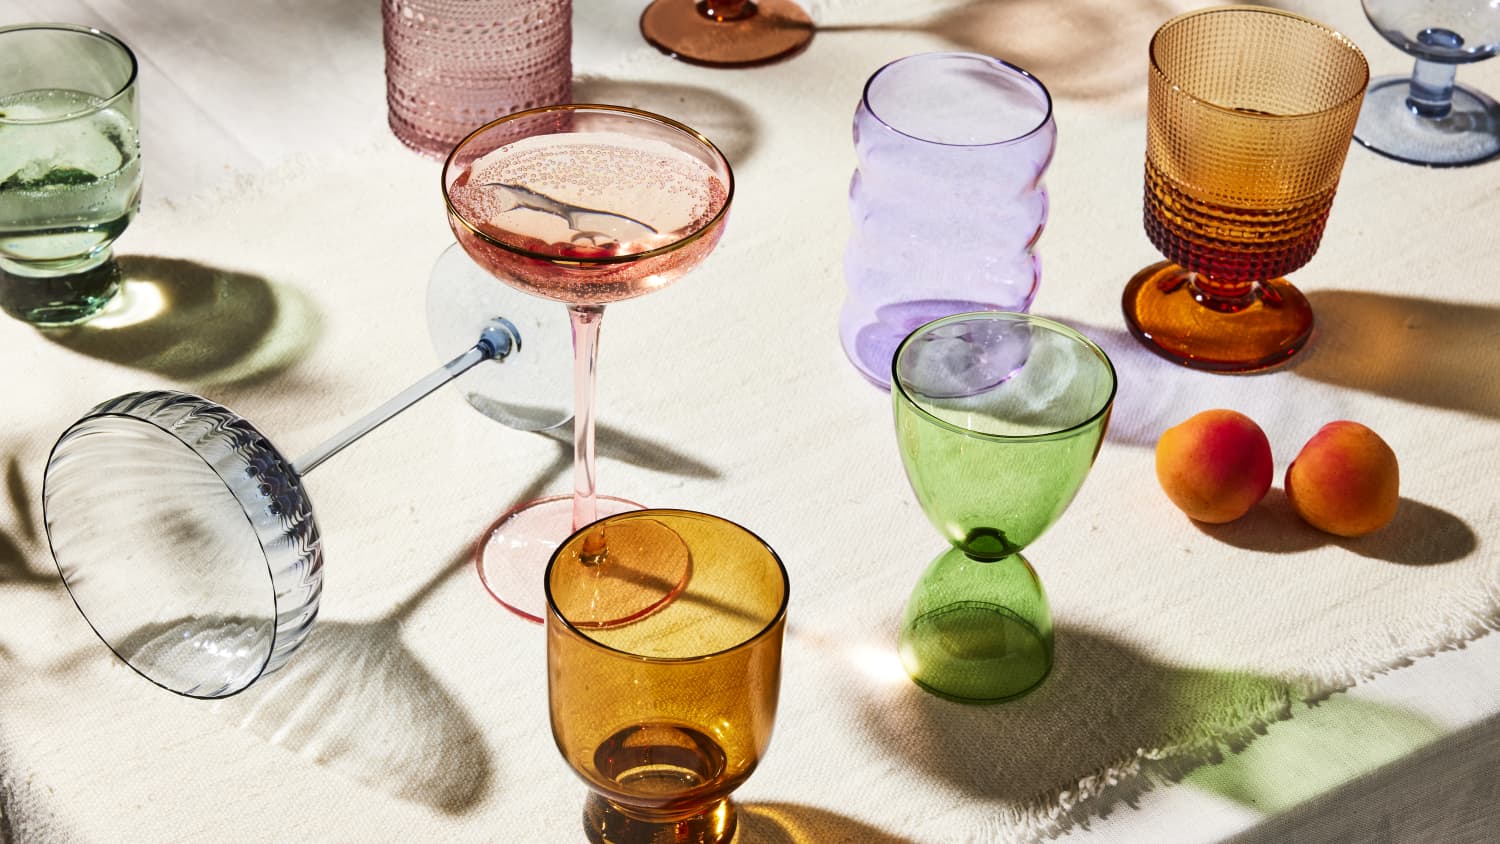 Aesthetic Glassware: 14 Trendy Options for Every Type of Beverage